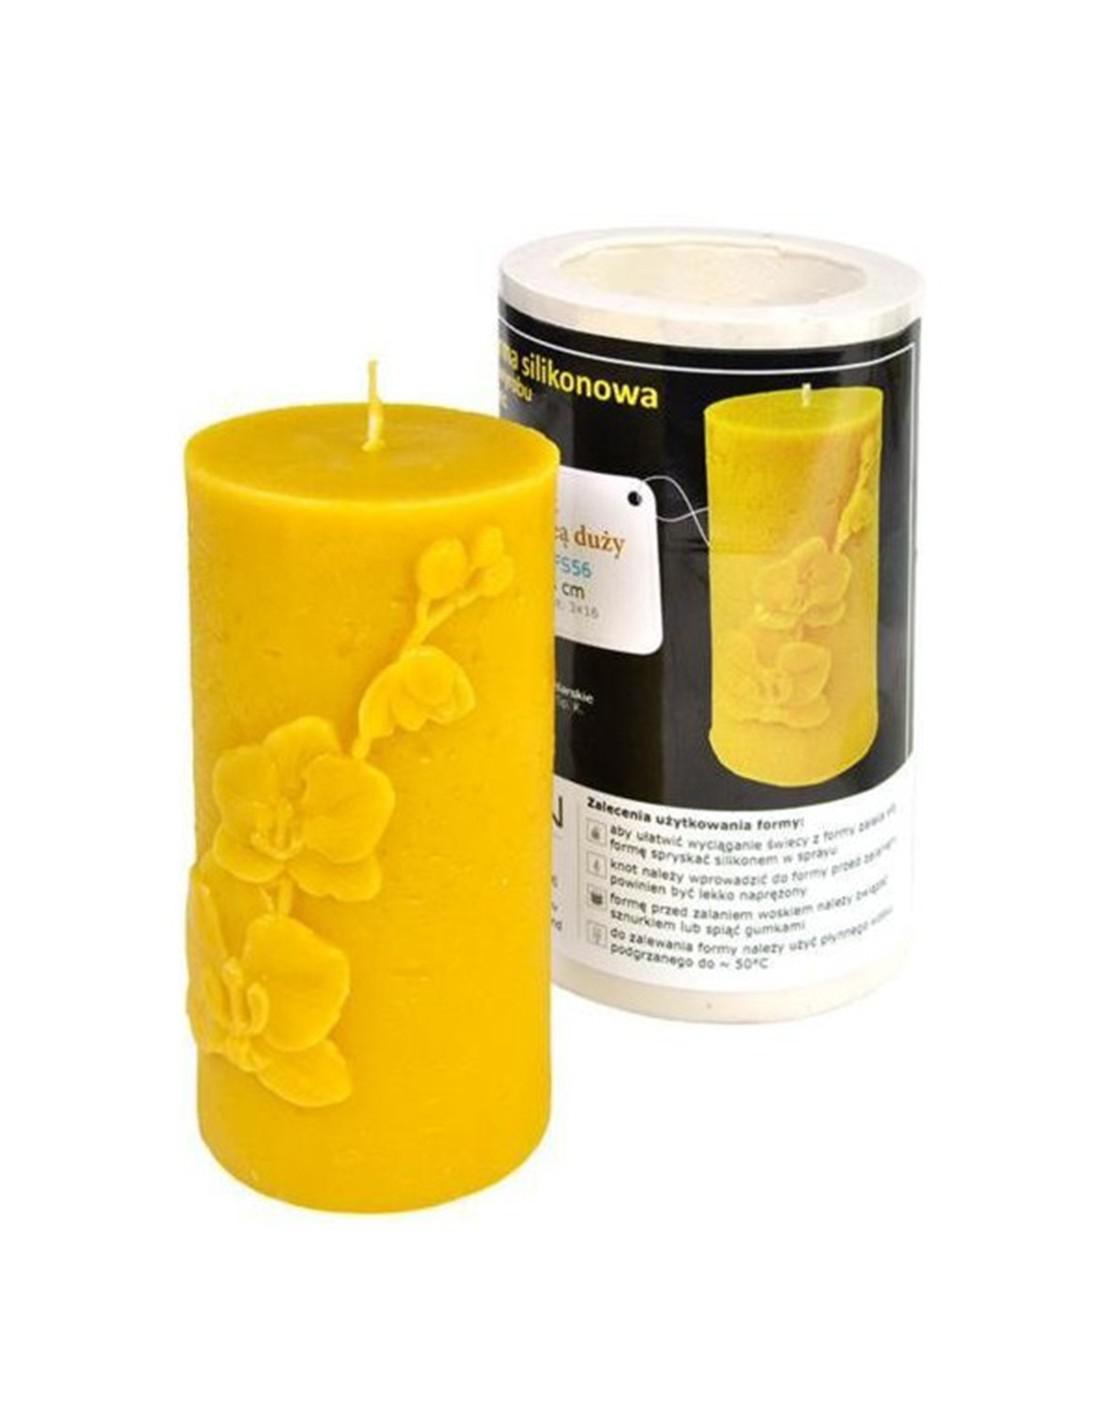 Cylinder with Orchids Candle Mould